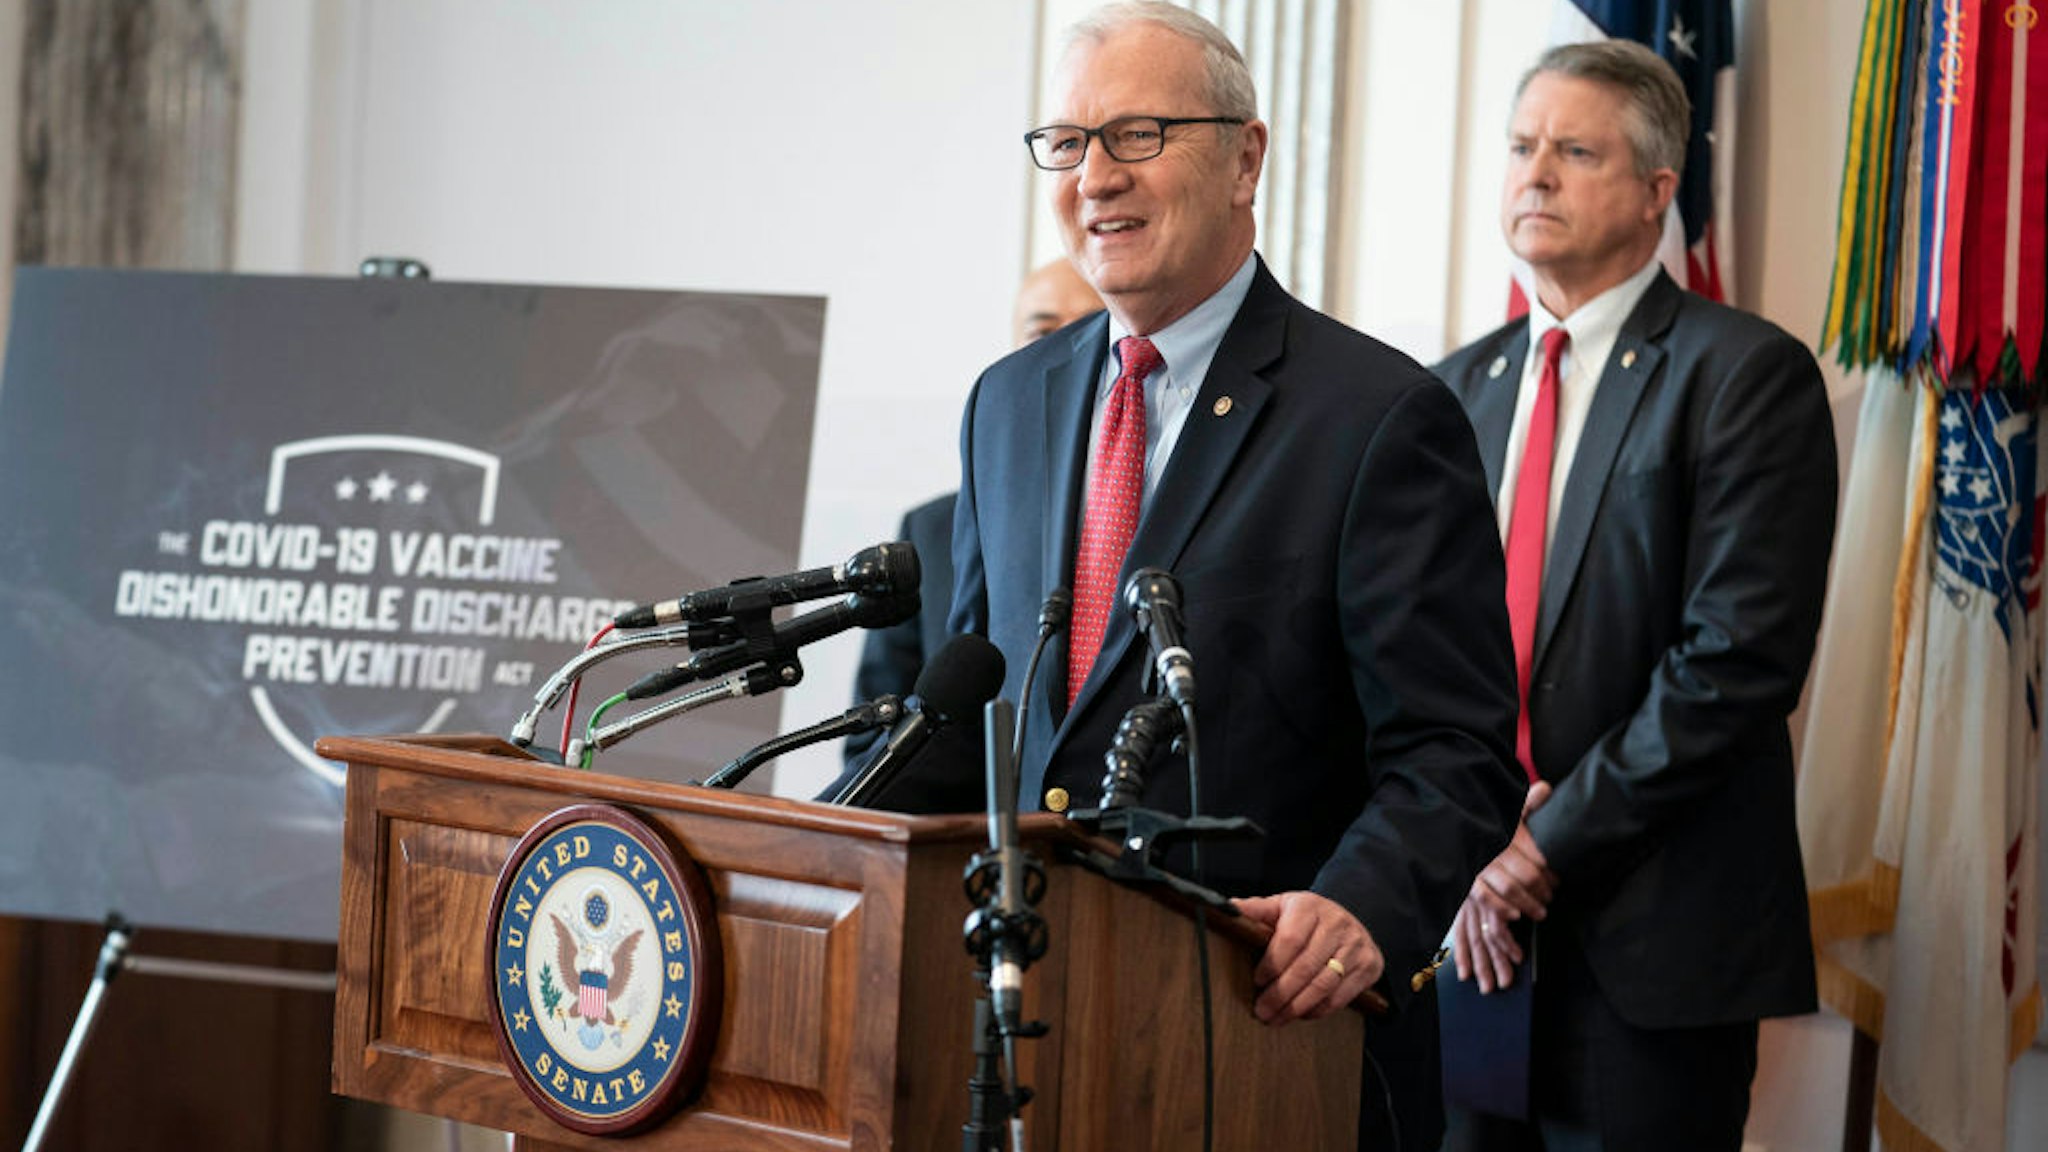 Senator Kevin Cramer (R-ND) calls for members of the military who chose to not get the COVID vaccine to not be dishonorably discharged during a news conference in the Russell Senate Office Building on Capitol Hill on November 4, 2021 in Washington, DC.